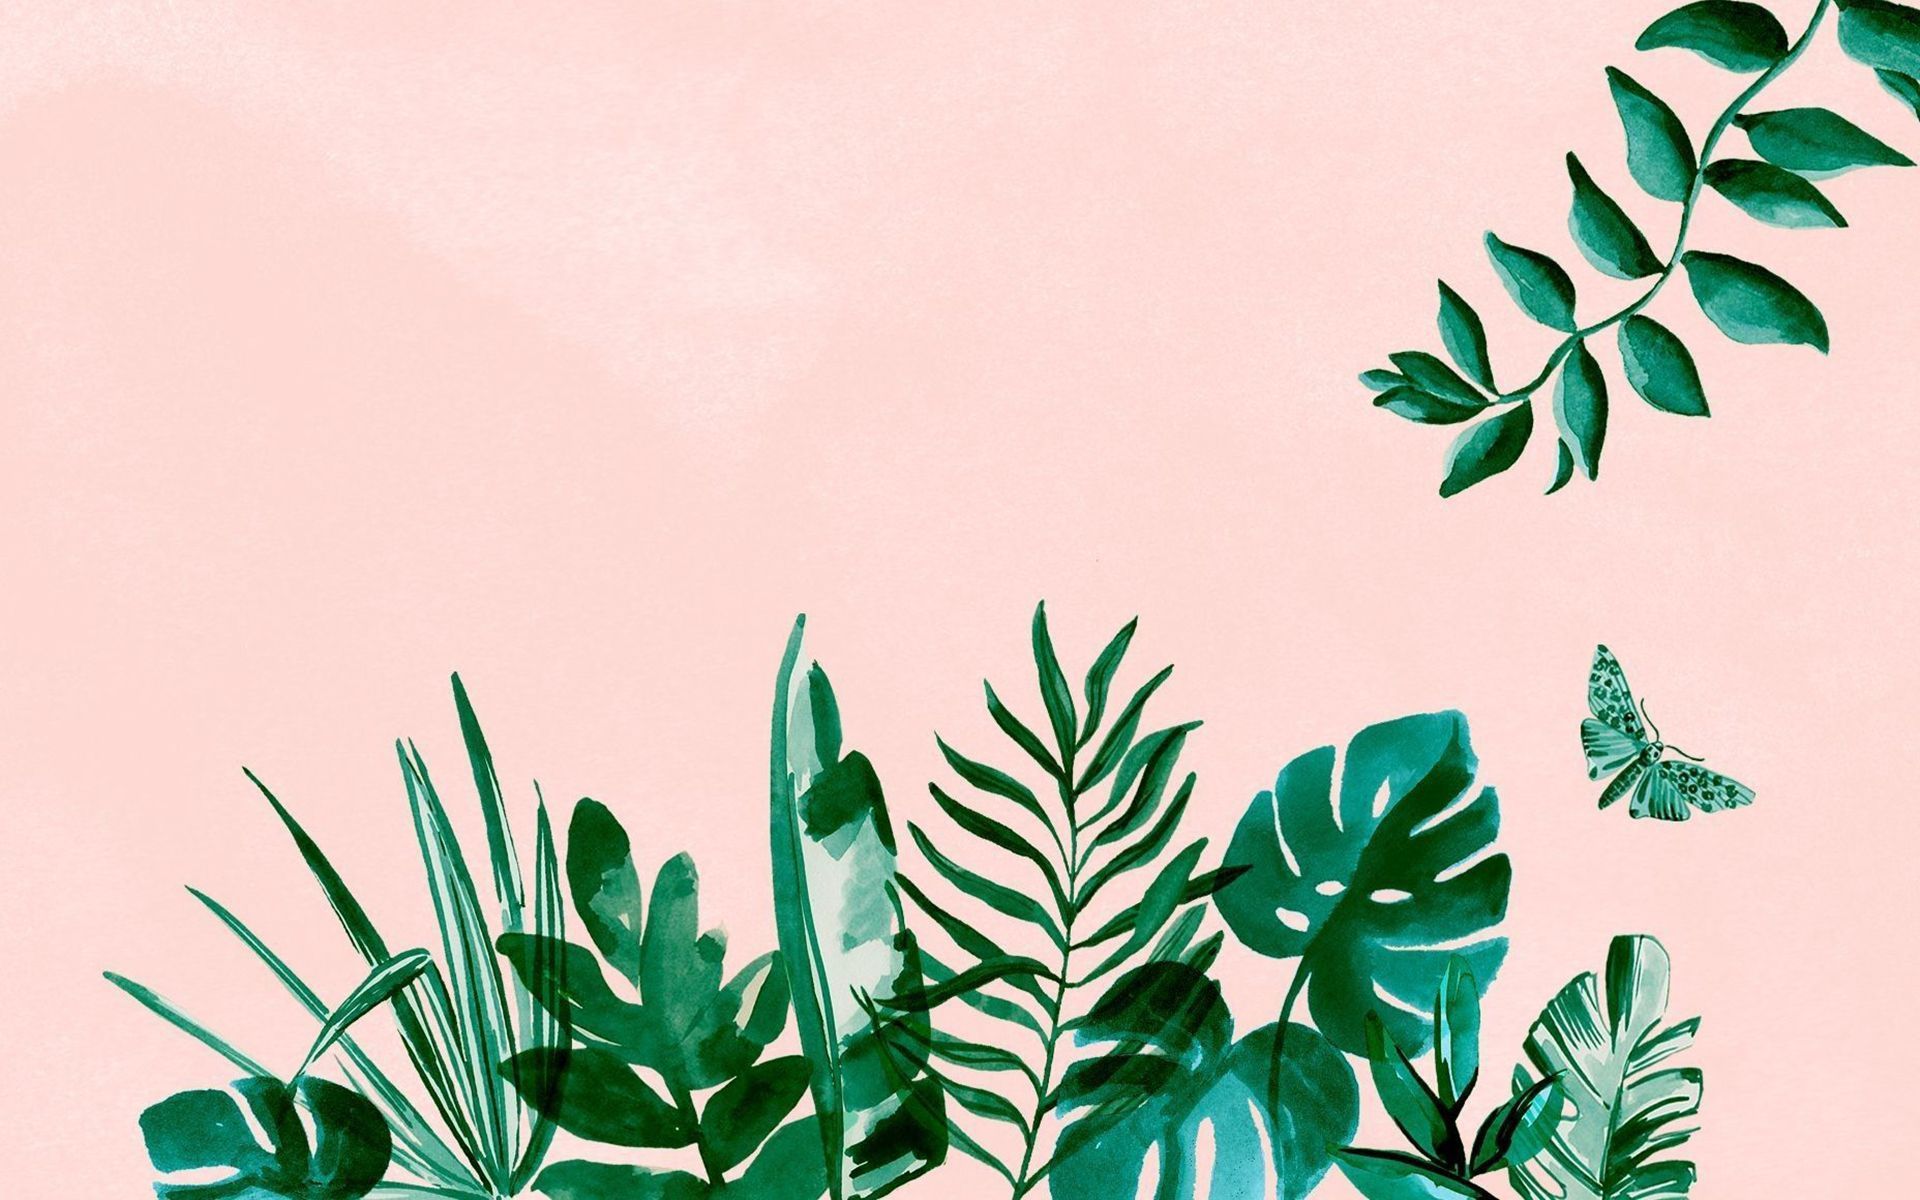 A painting of plants and butterflies on pink background - MacBook, green, pastel, desktop, plants, summer, June, leaves, laptop, tropical, couple, iMac